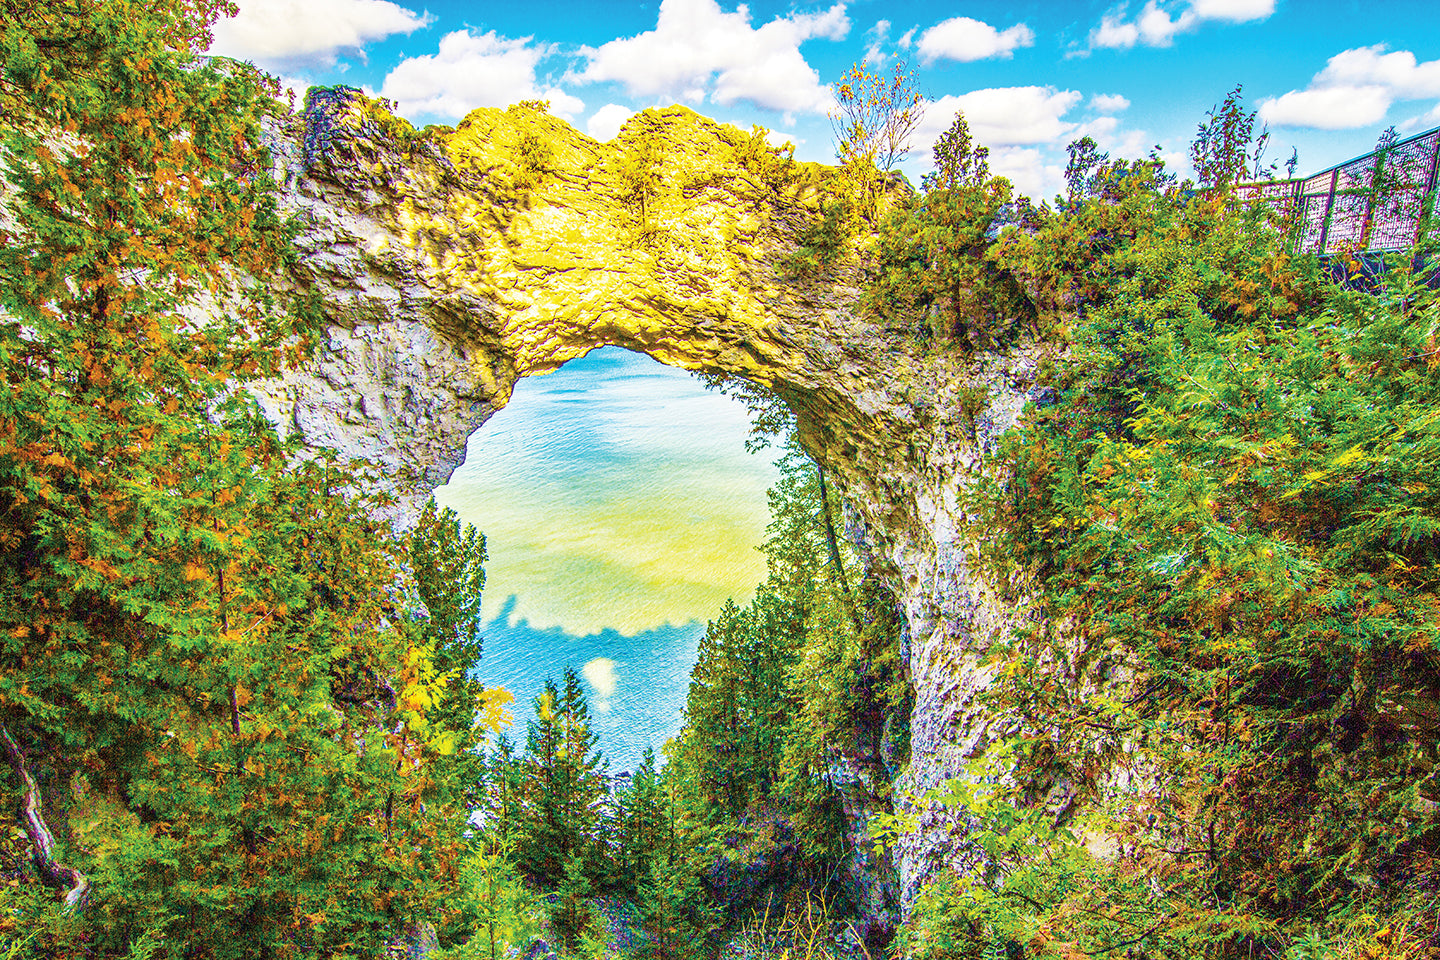 Arch Rock's Shadow in the Water, a Mackinac Island photograph by Jennifer Wohletz.